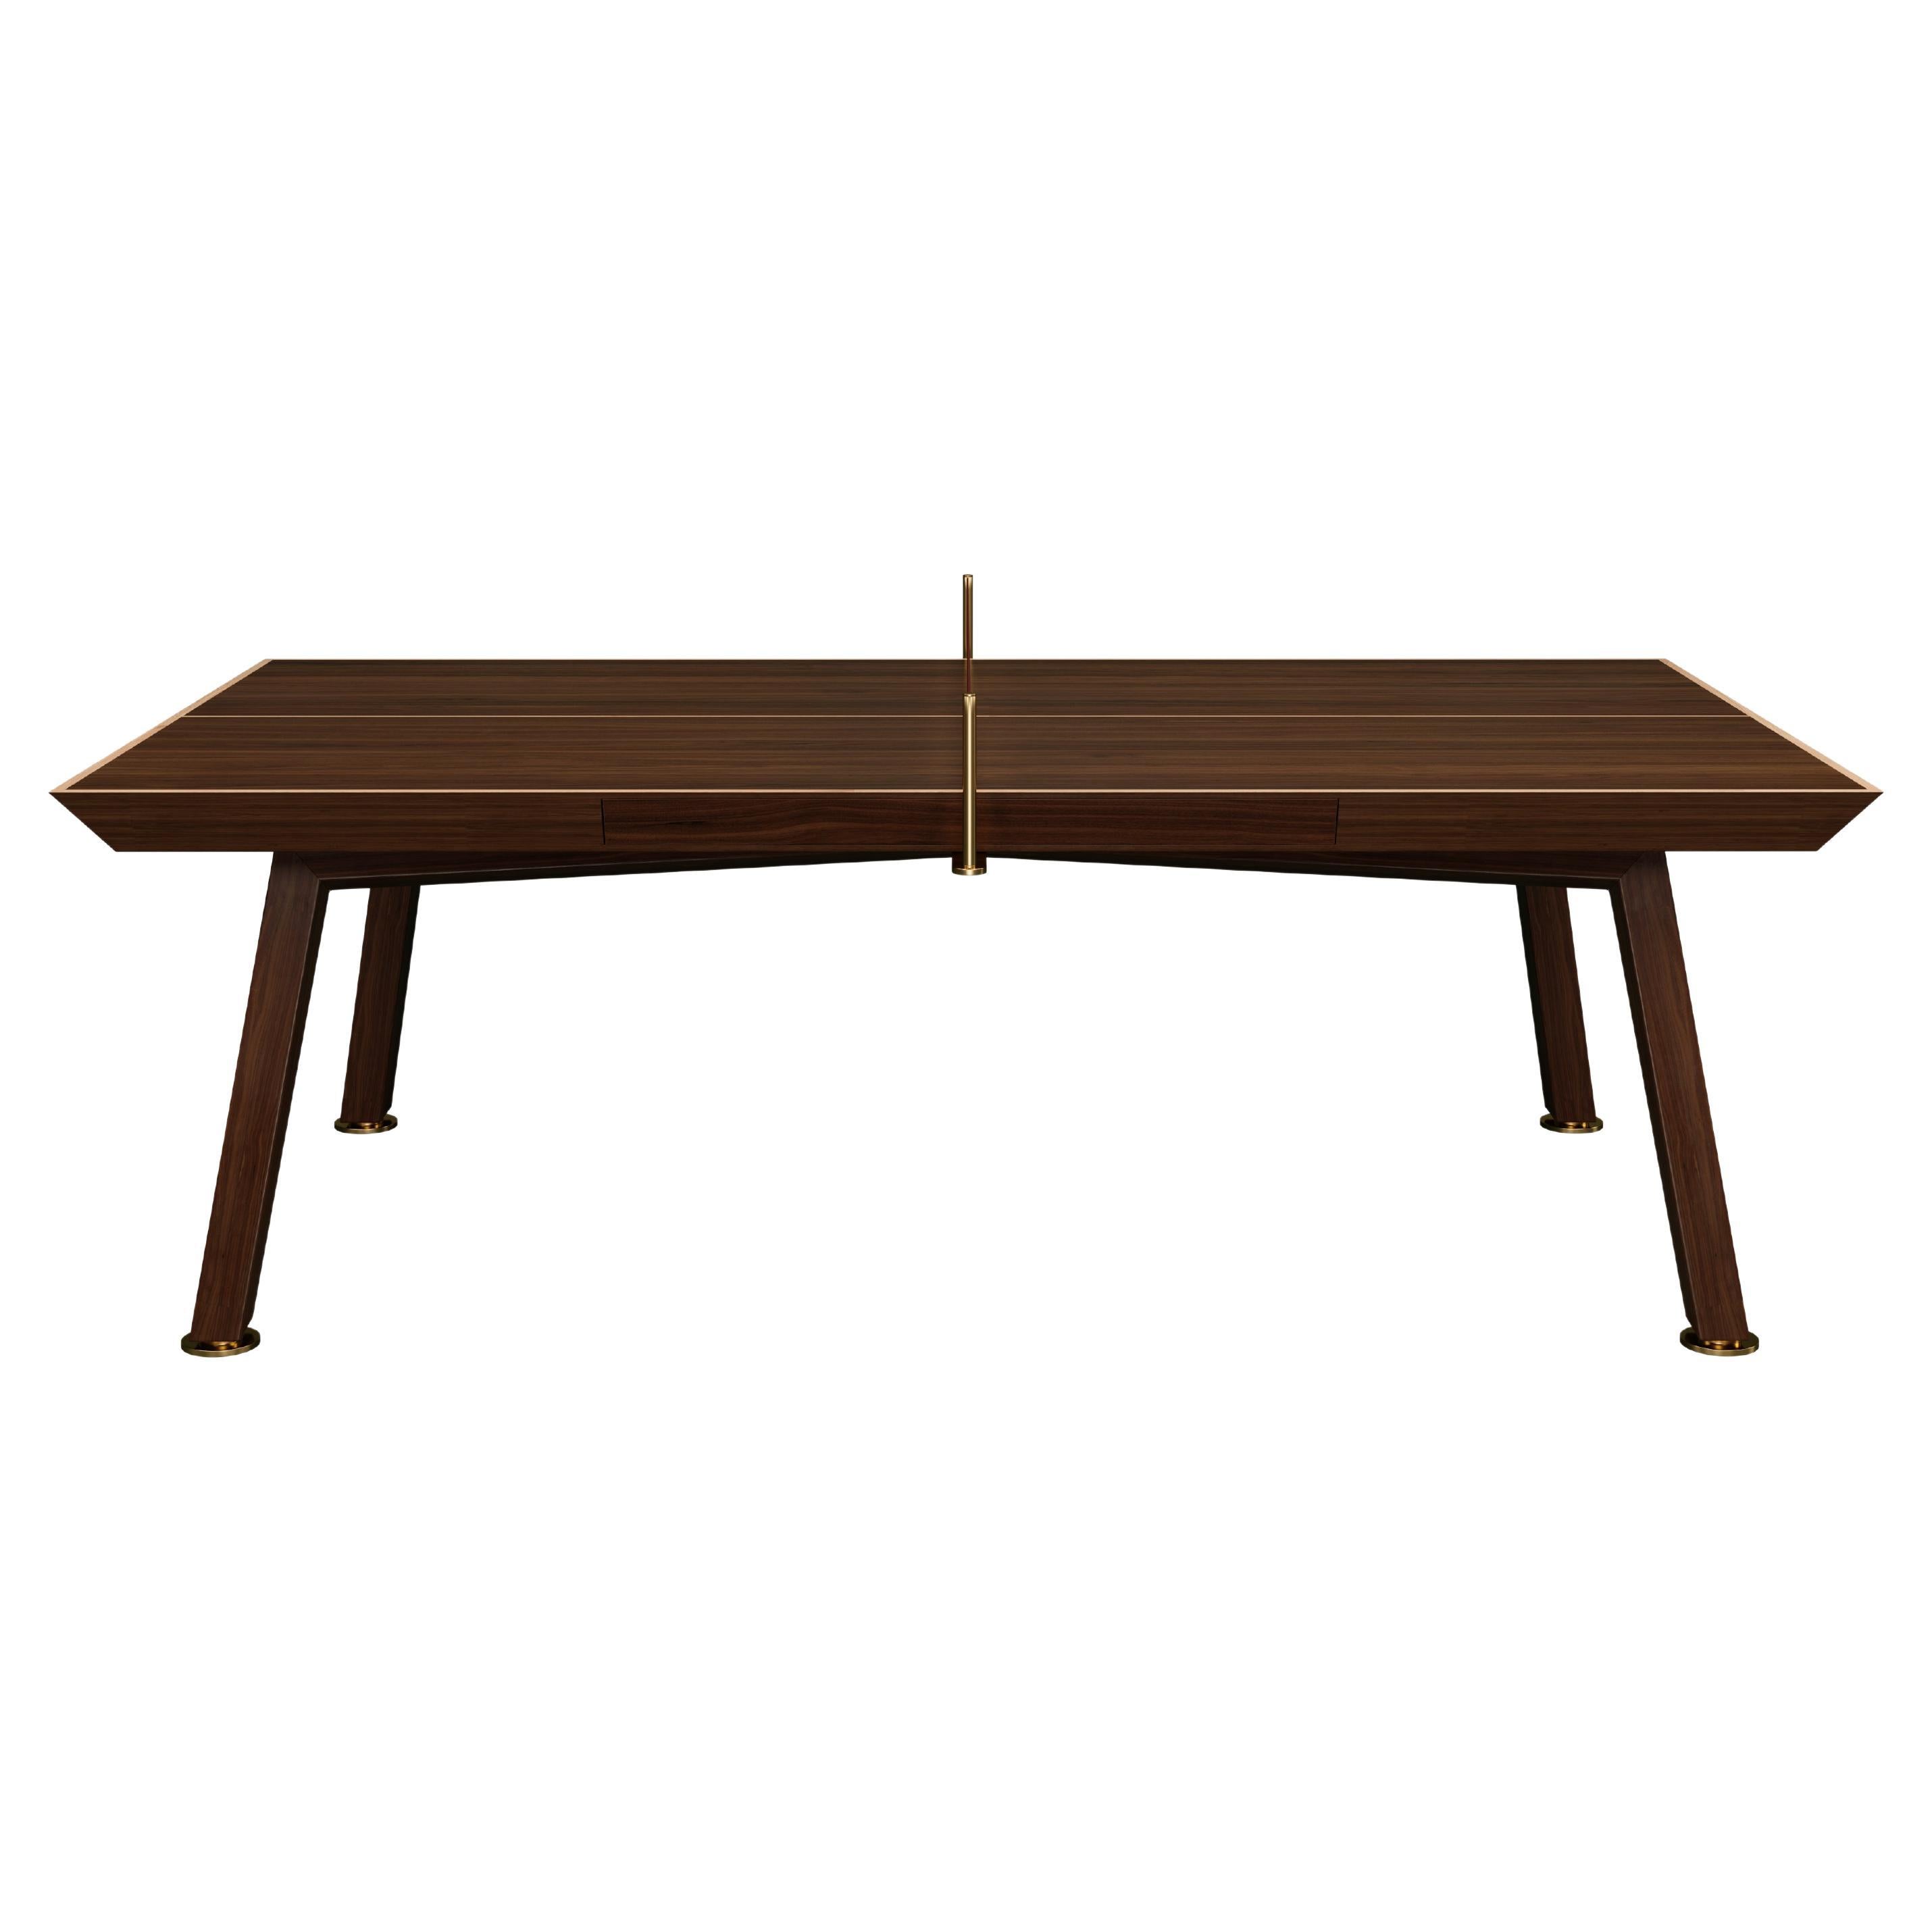 21st Century Keppel Ping Pong Table Walnut Wood Leather Oak For Sale